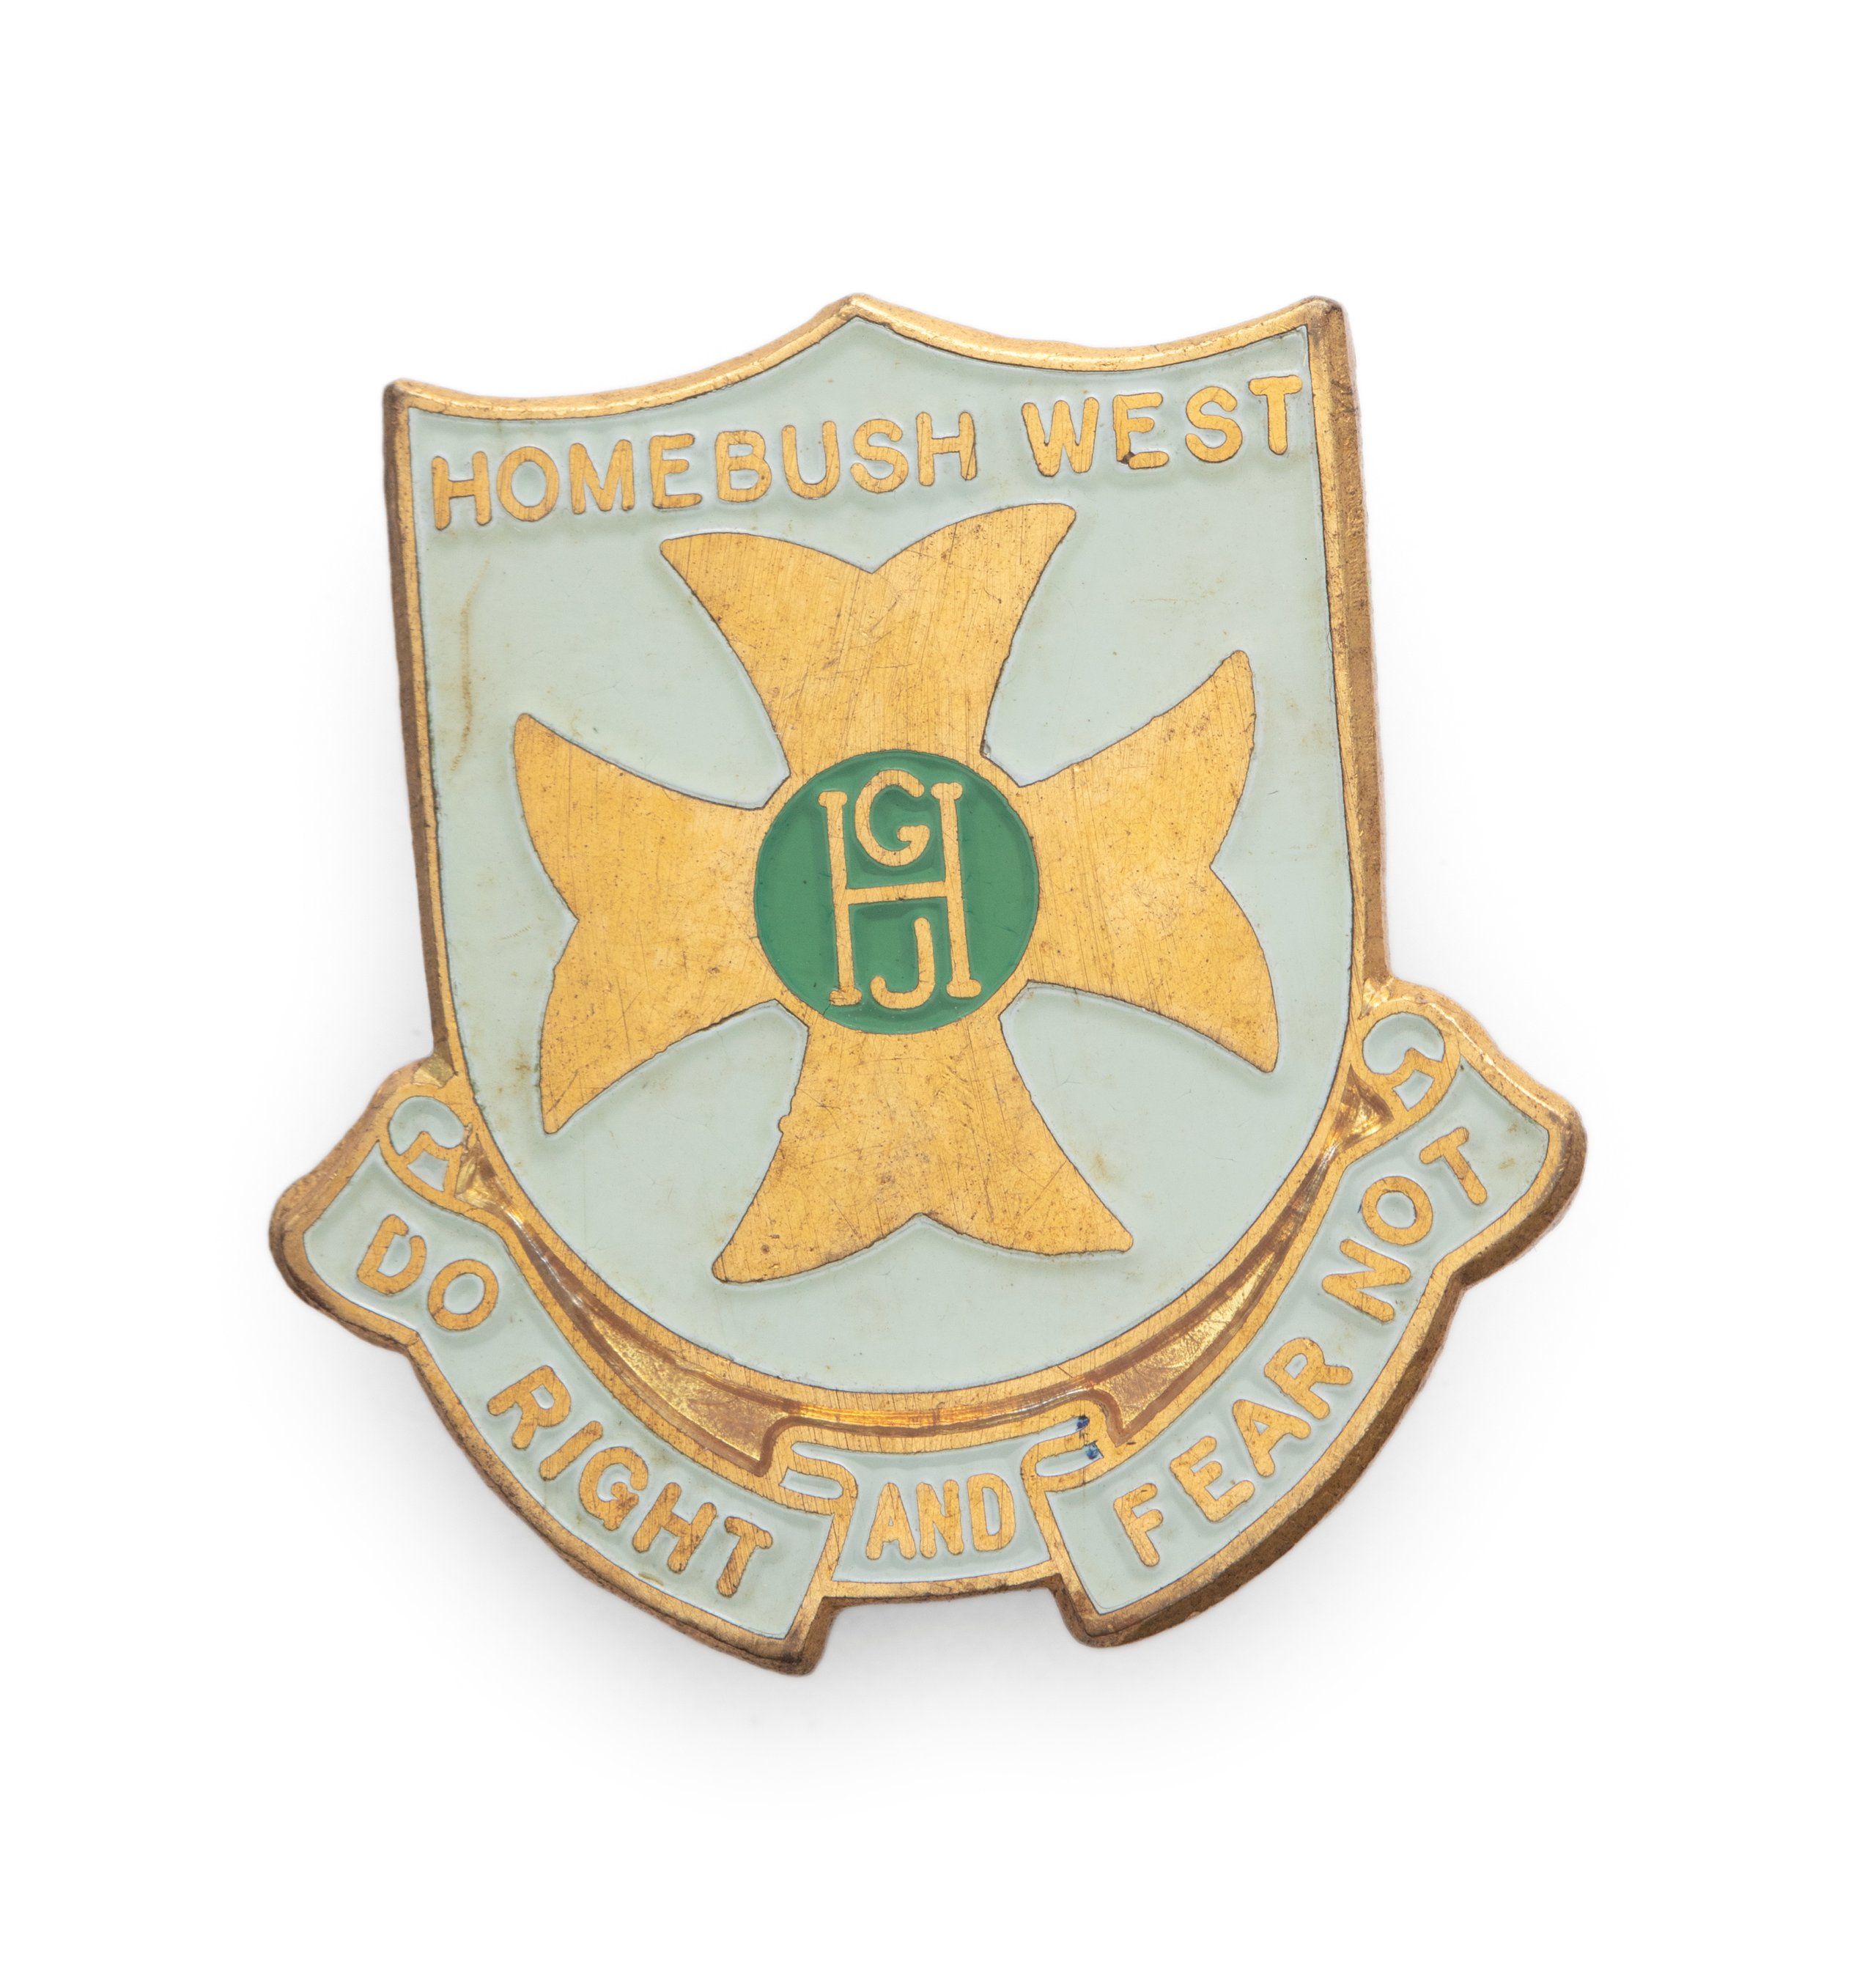 'Do Right and Fear Not' school badge